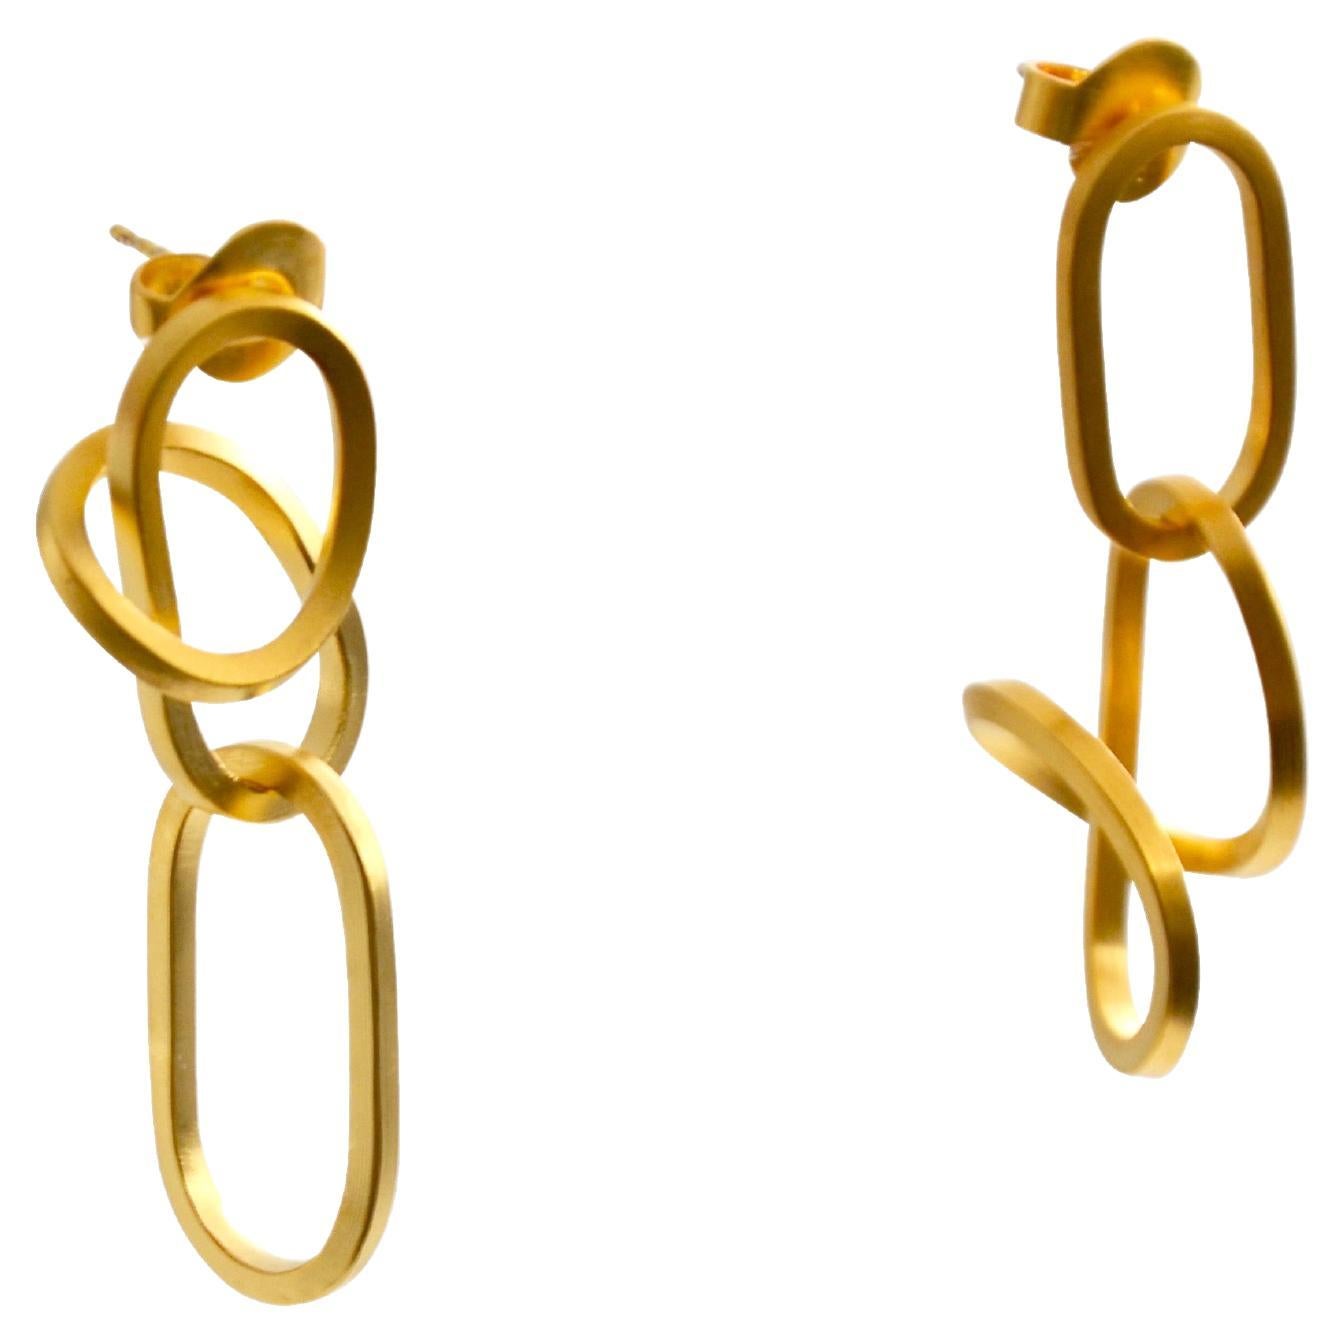 Contemporary Gold plated Sterling Silver Earrings